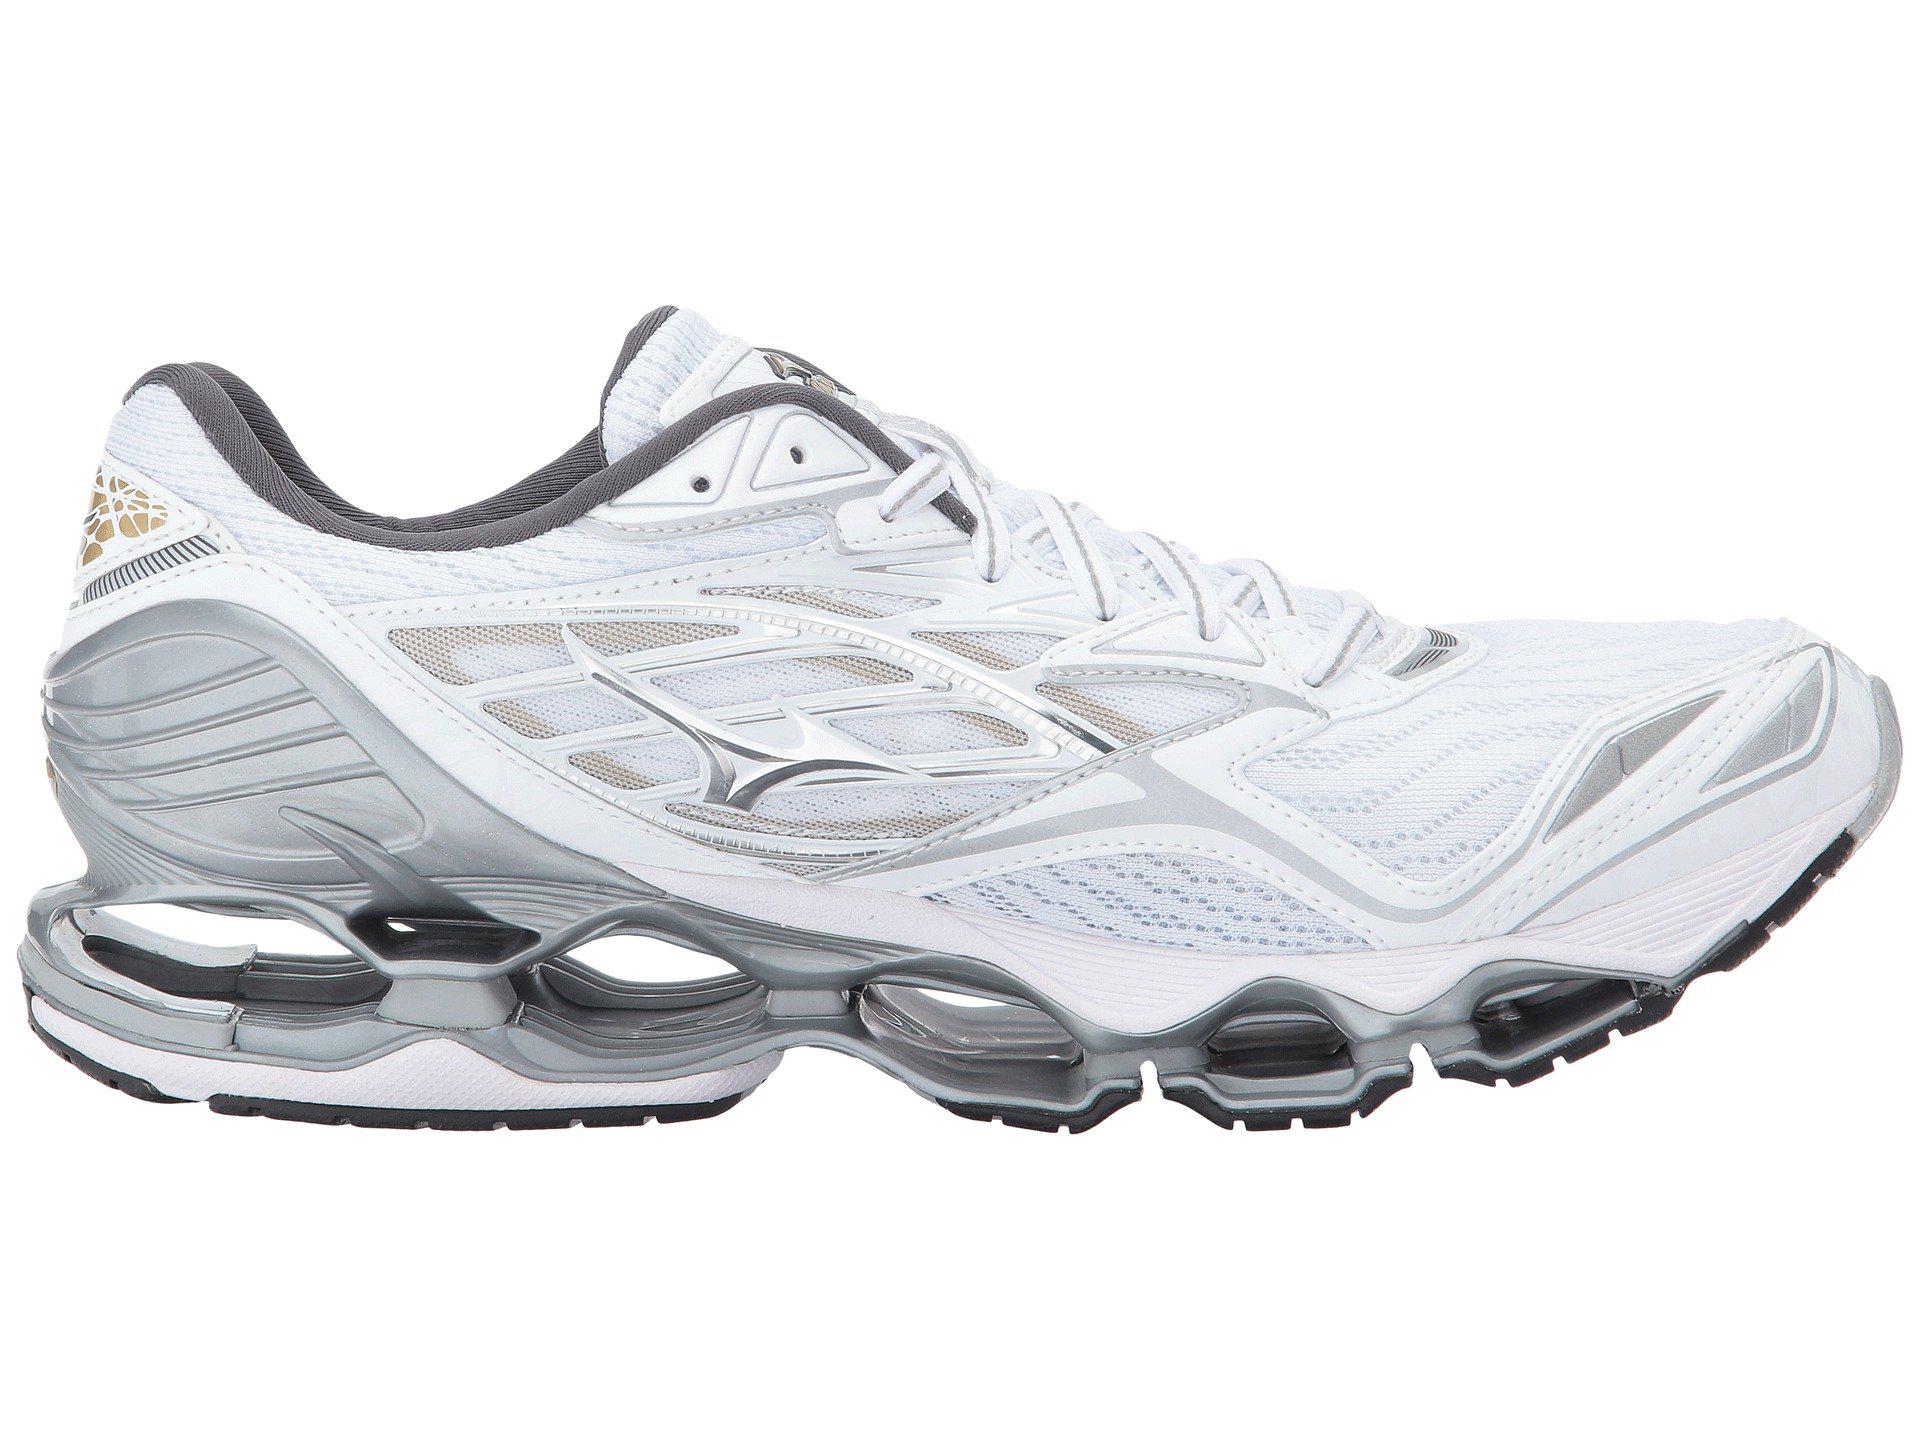 Mizuno Synthetic Wave Prophecy 6 in White/Silver/Gold (Metallic) for Men -  Lyst